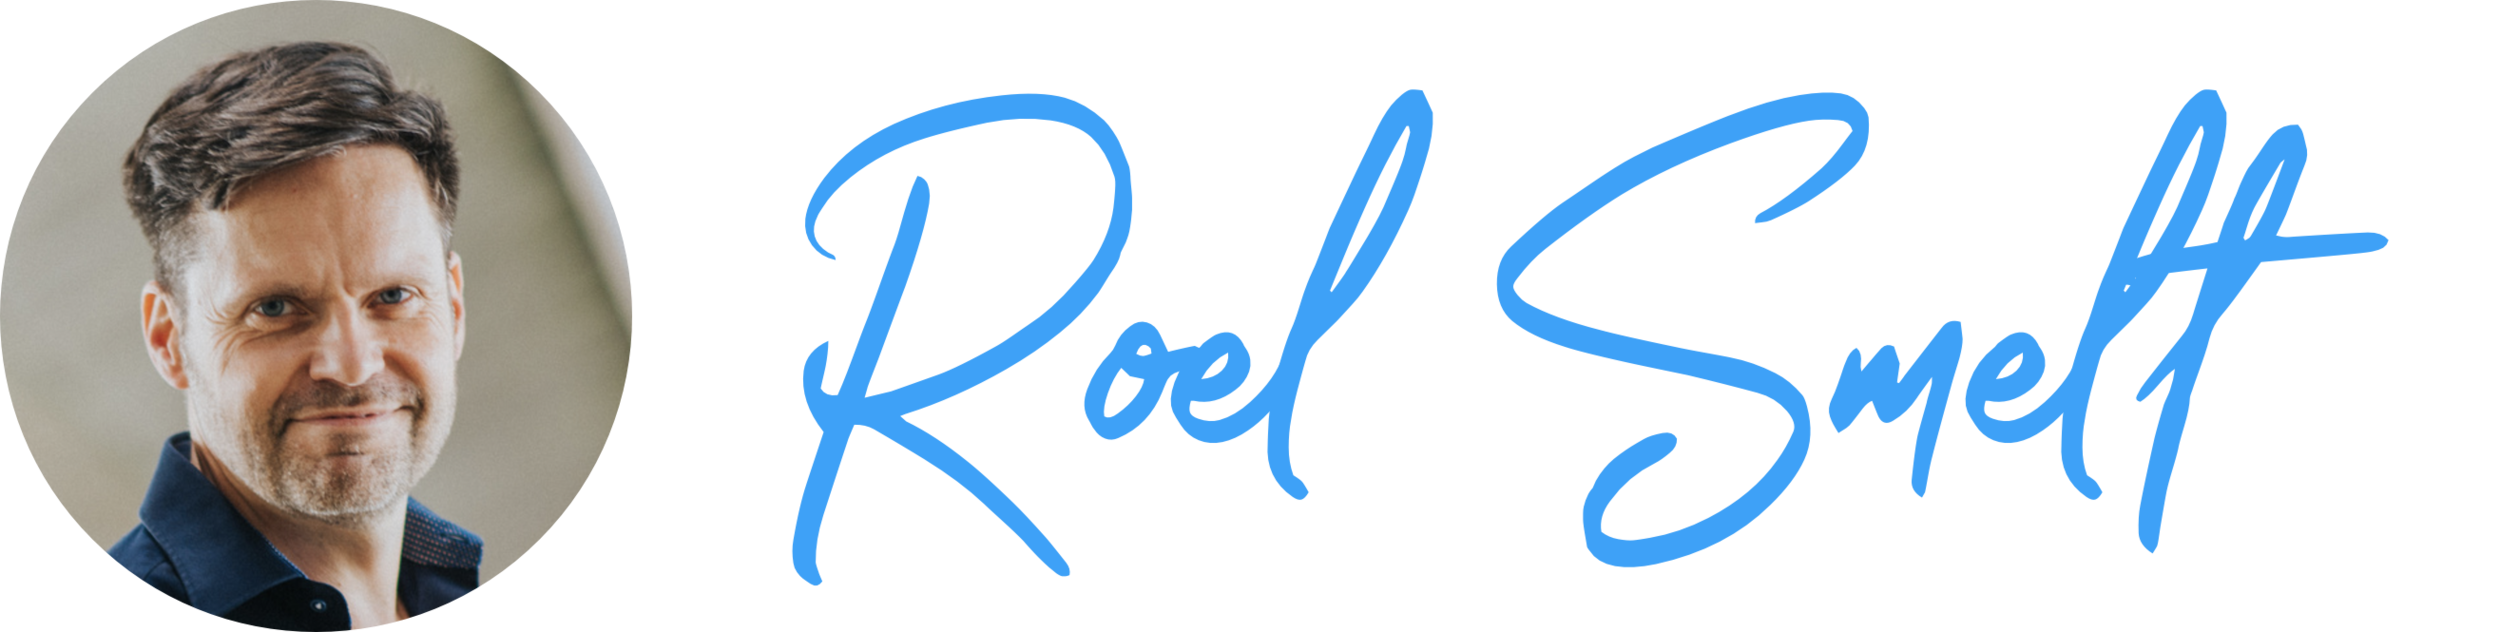 Roel+2018Q3+Background.png